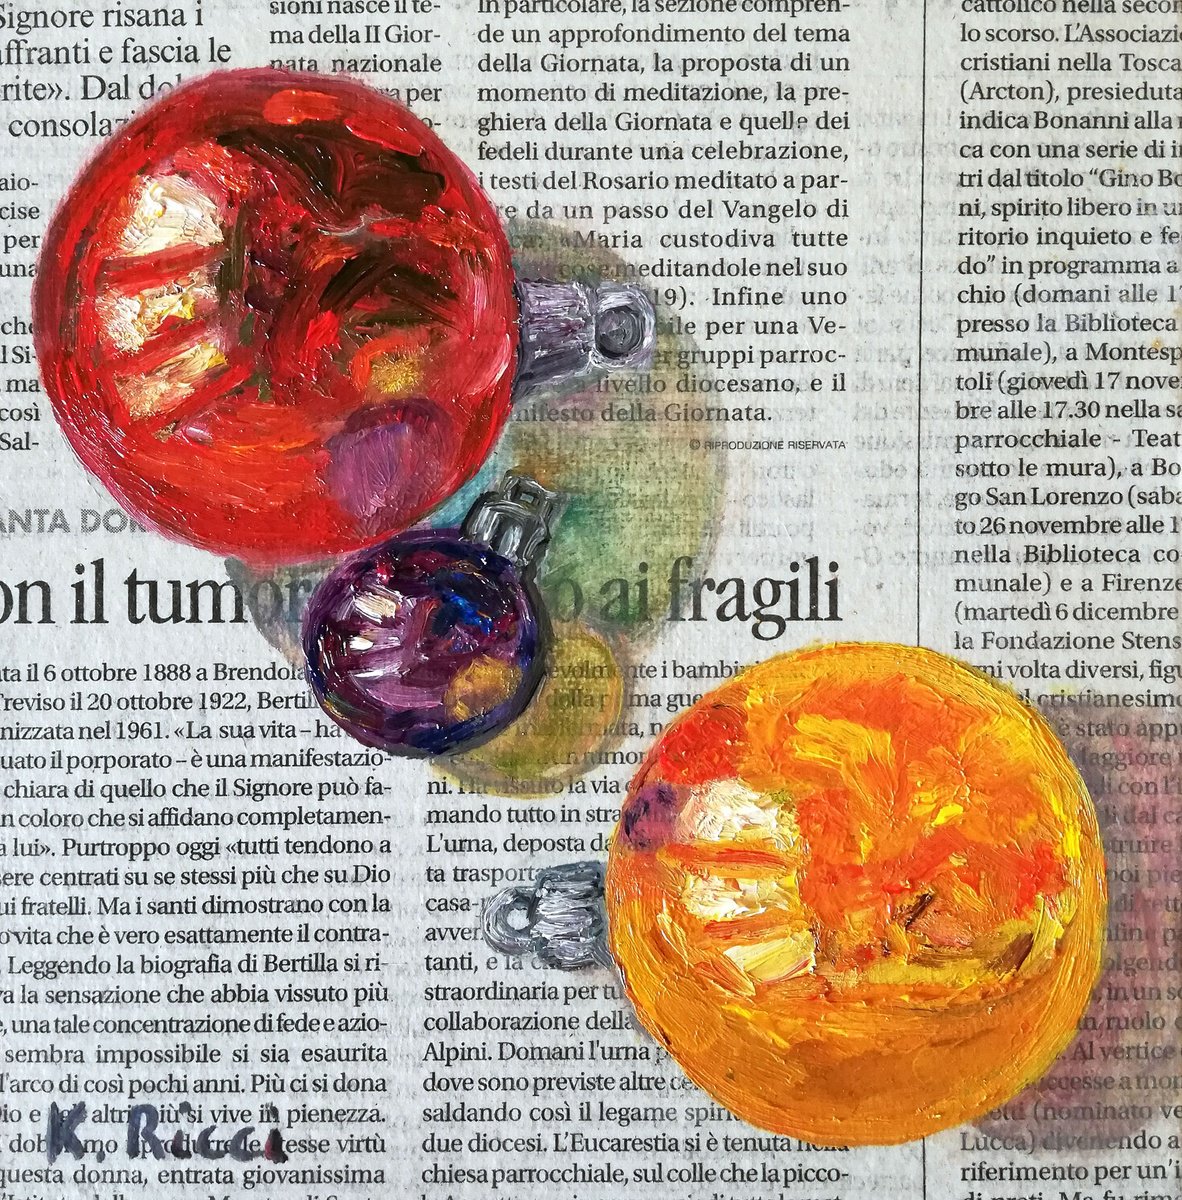 Christmas Balls on Newspaper Original Oil on Canvas Board Painting 6 by 6 inches (15x15... by Katia Ricci